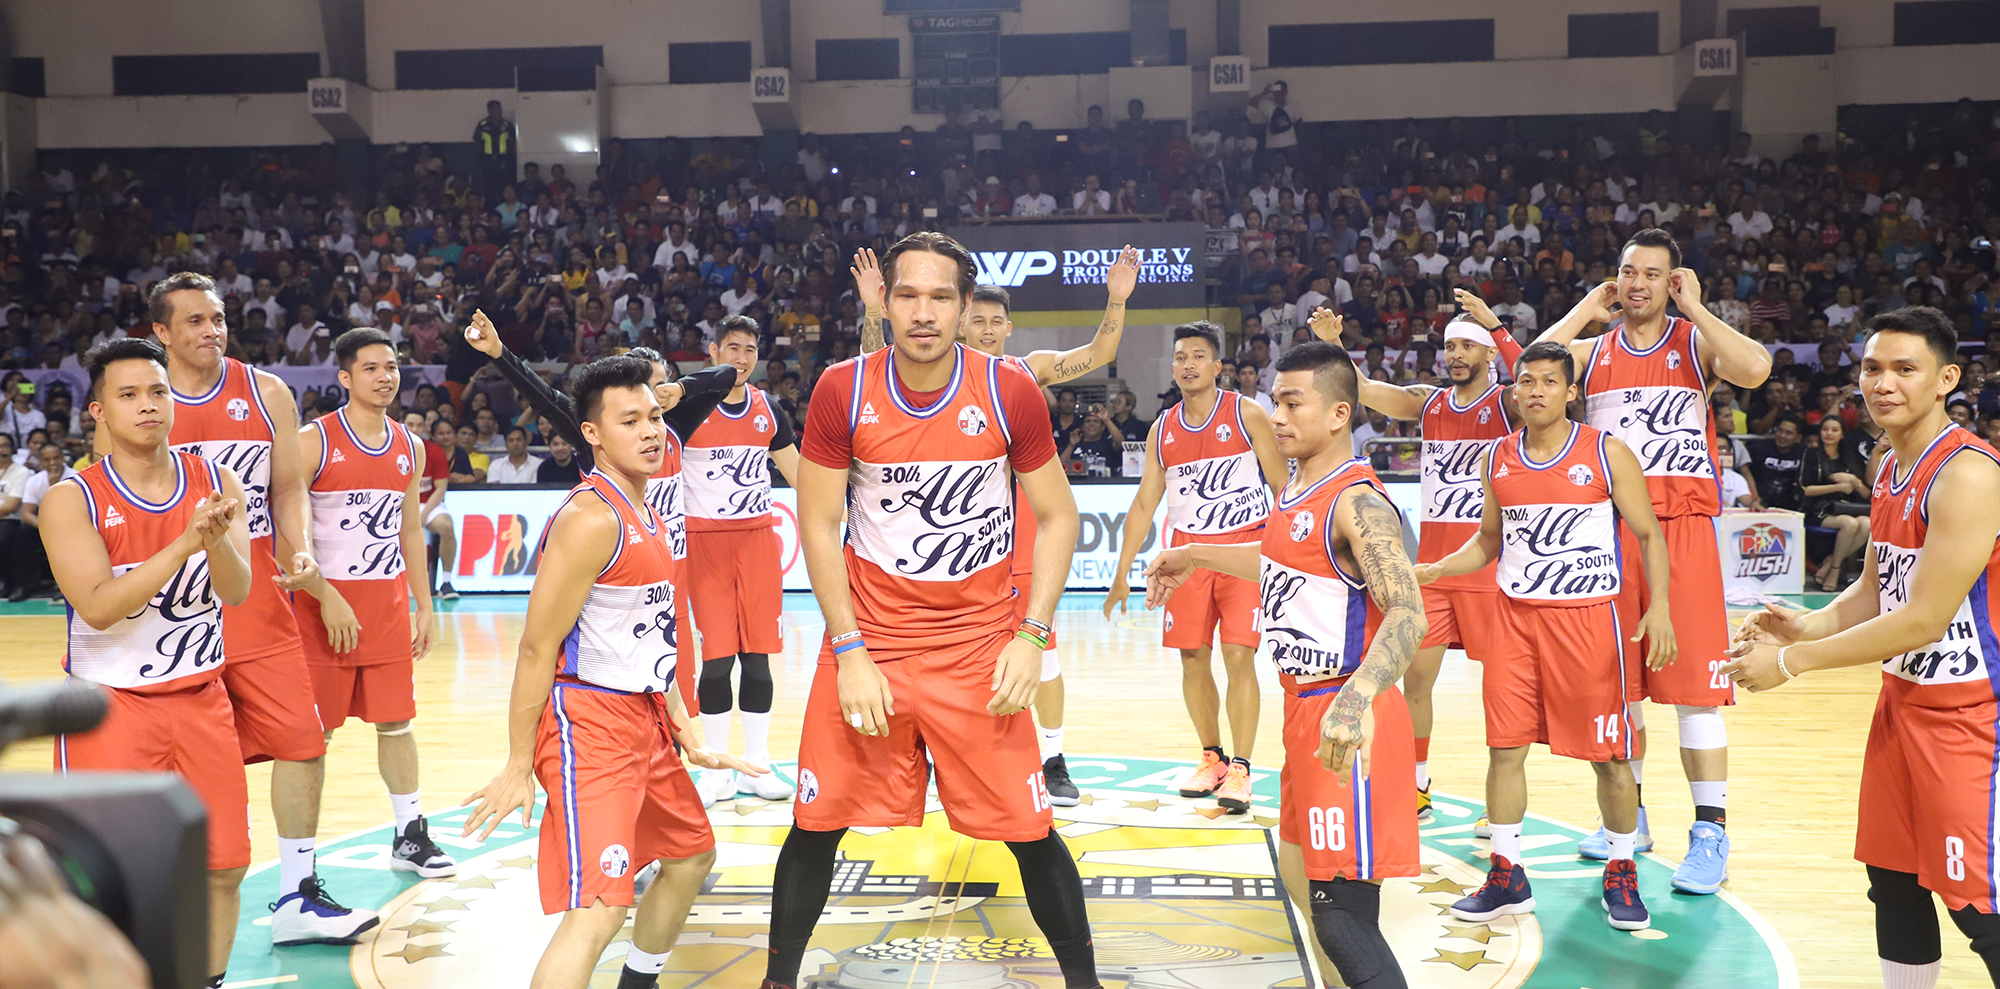 GALLERY: Images from the 2019 PBA All-Star game in Pangasinan | Cebu ...